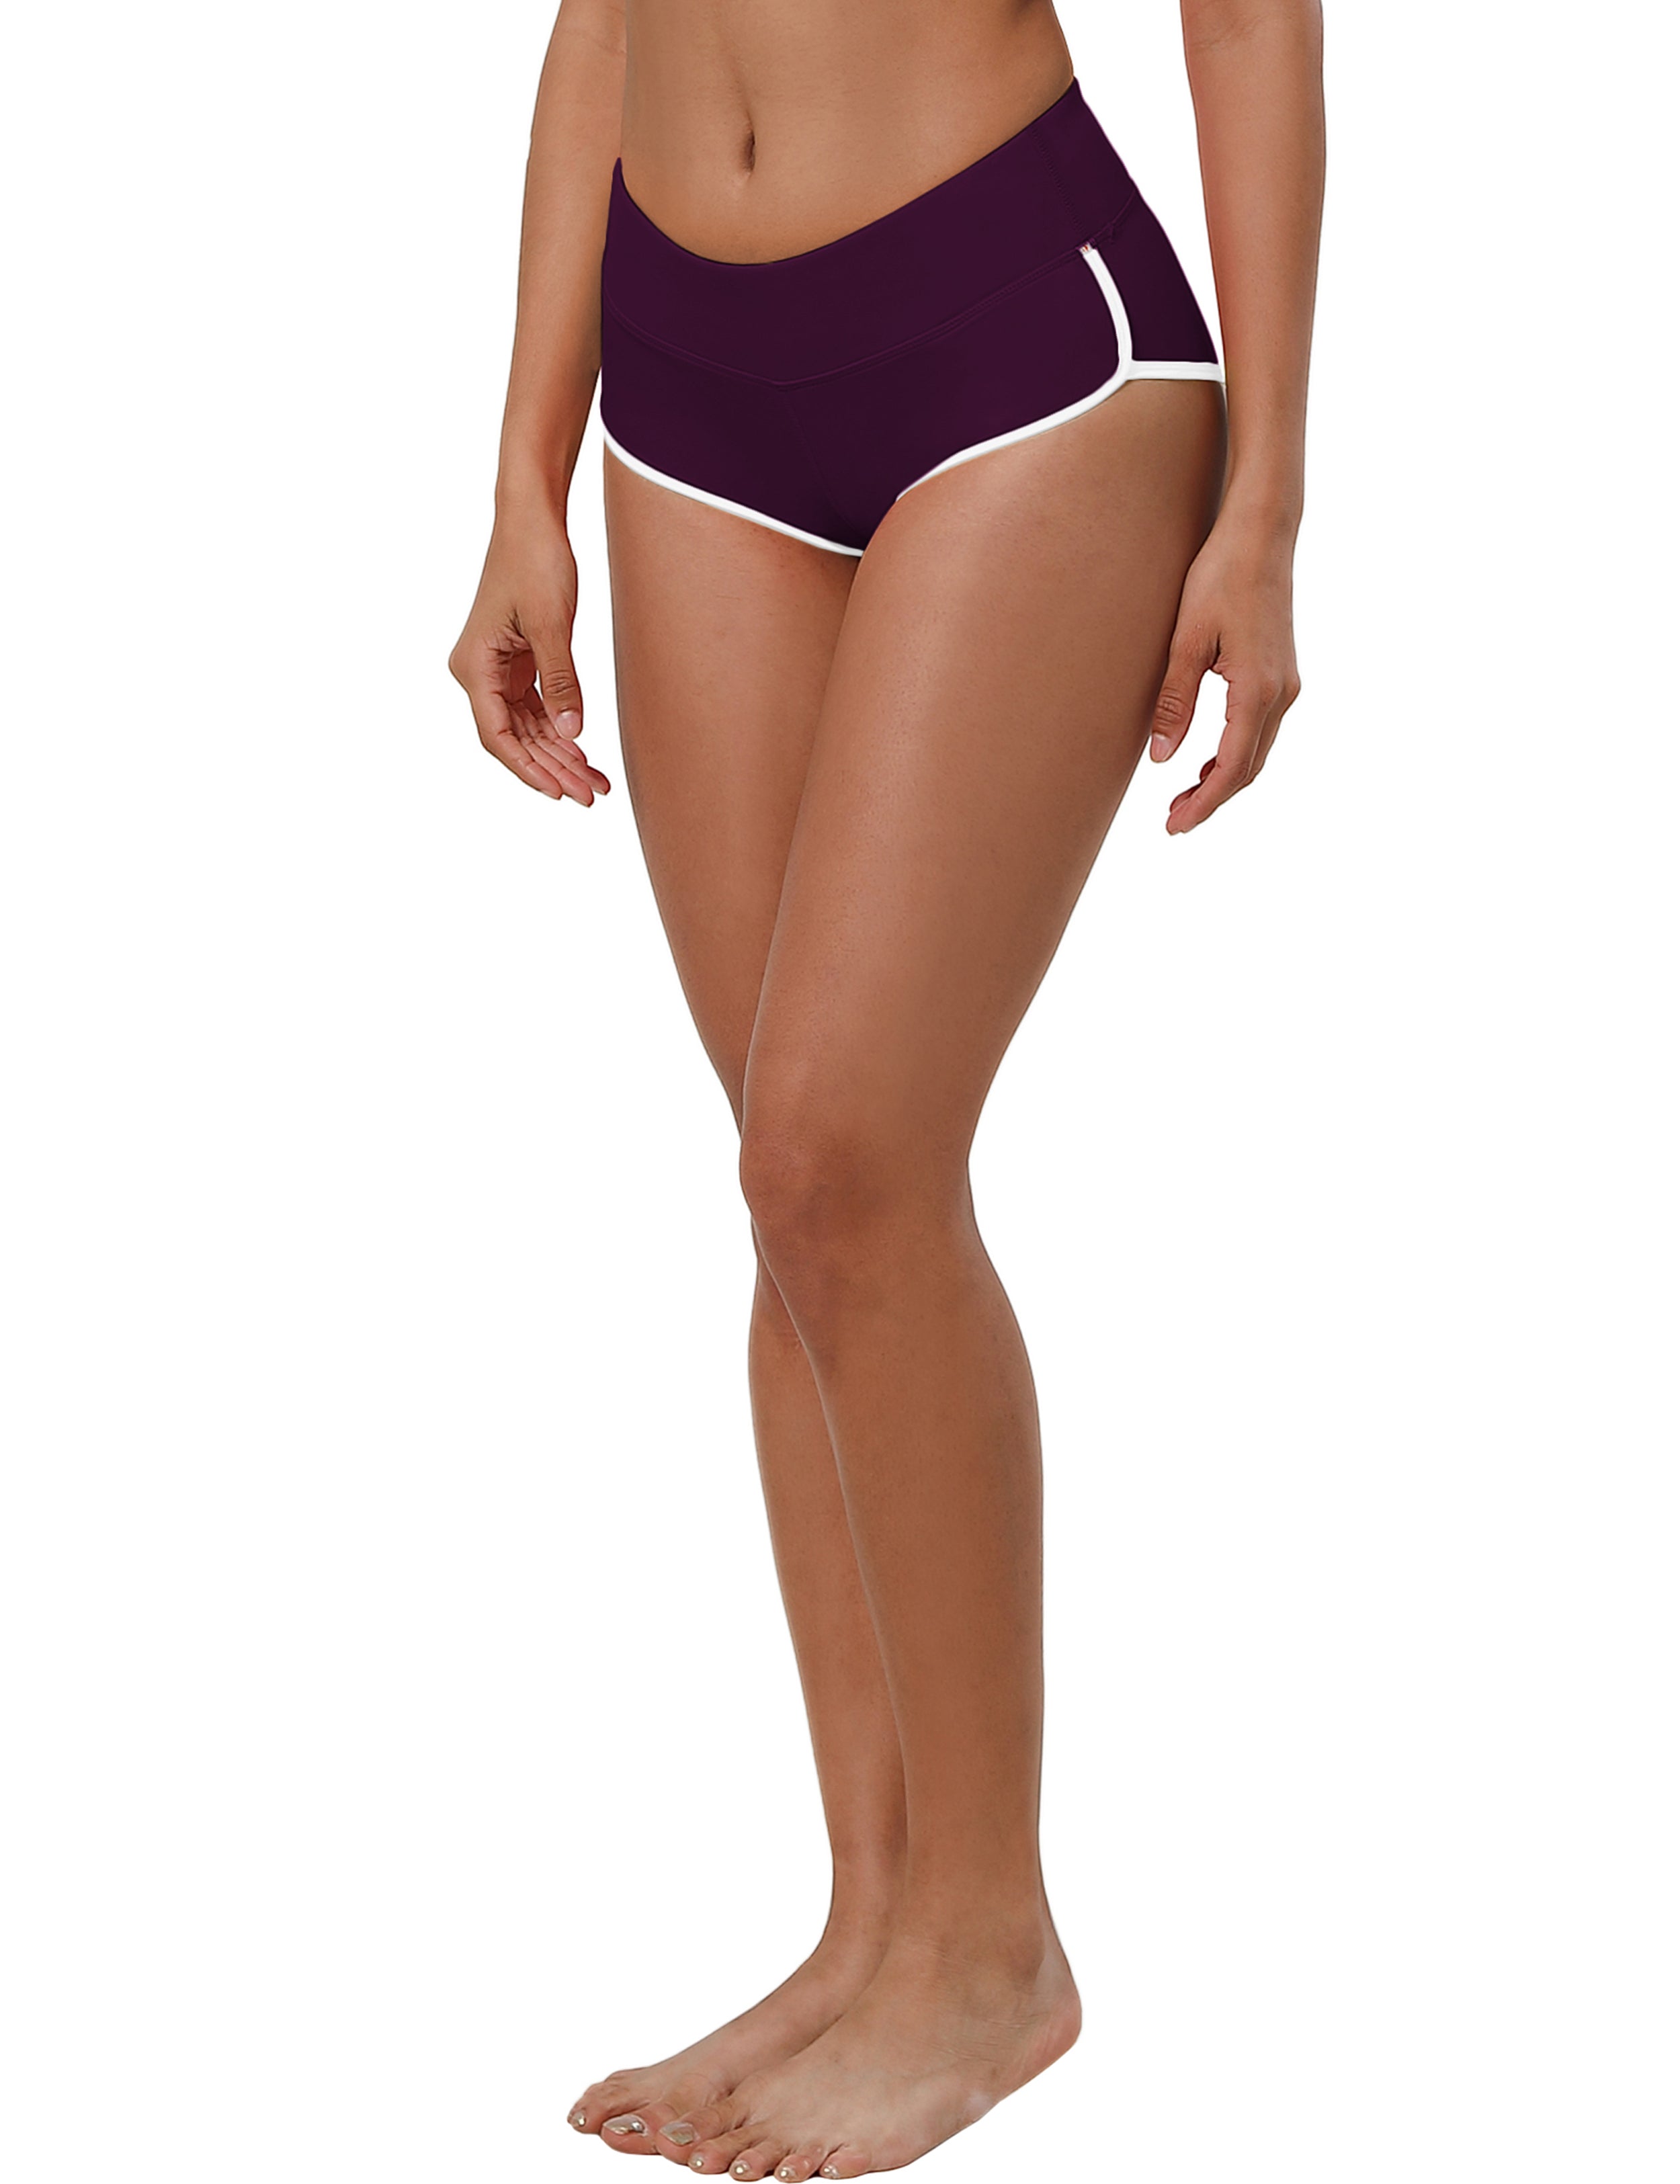 Sexy Booty Yoga Shorts plum Sleek, soft, smooth and totally comfortable: our newest sexy style is here. Softest-ever fabric High elasticity High density 4-way stretch Fabric doesn't attract lint easily No see-through Moisture-wicking Machine wash 75%Nylon/25%Spandex